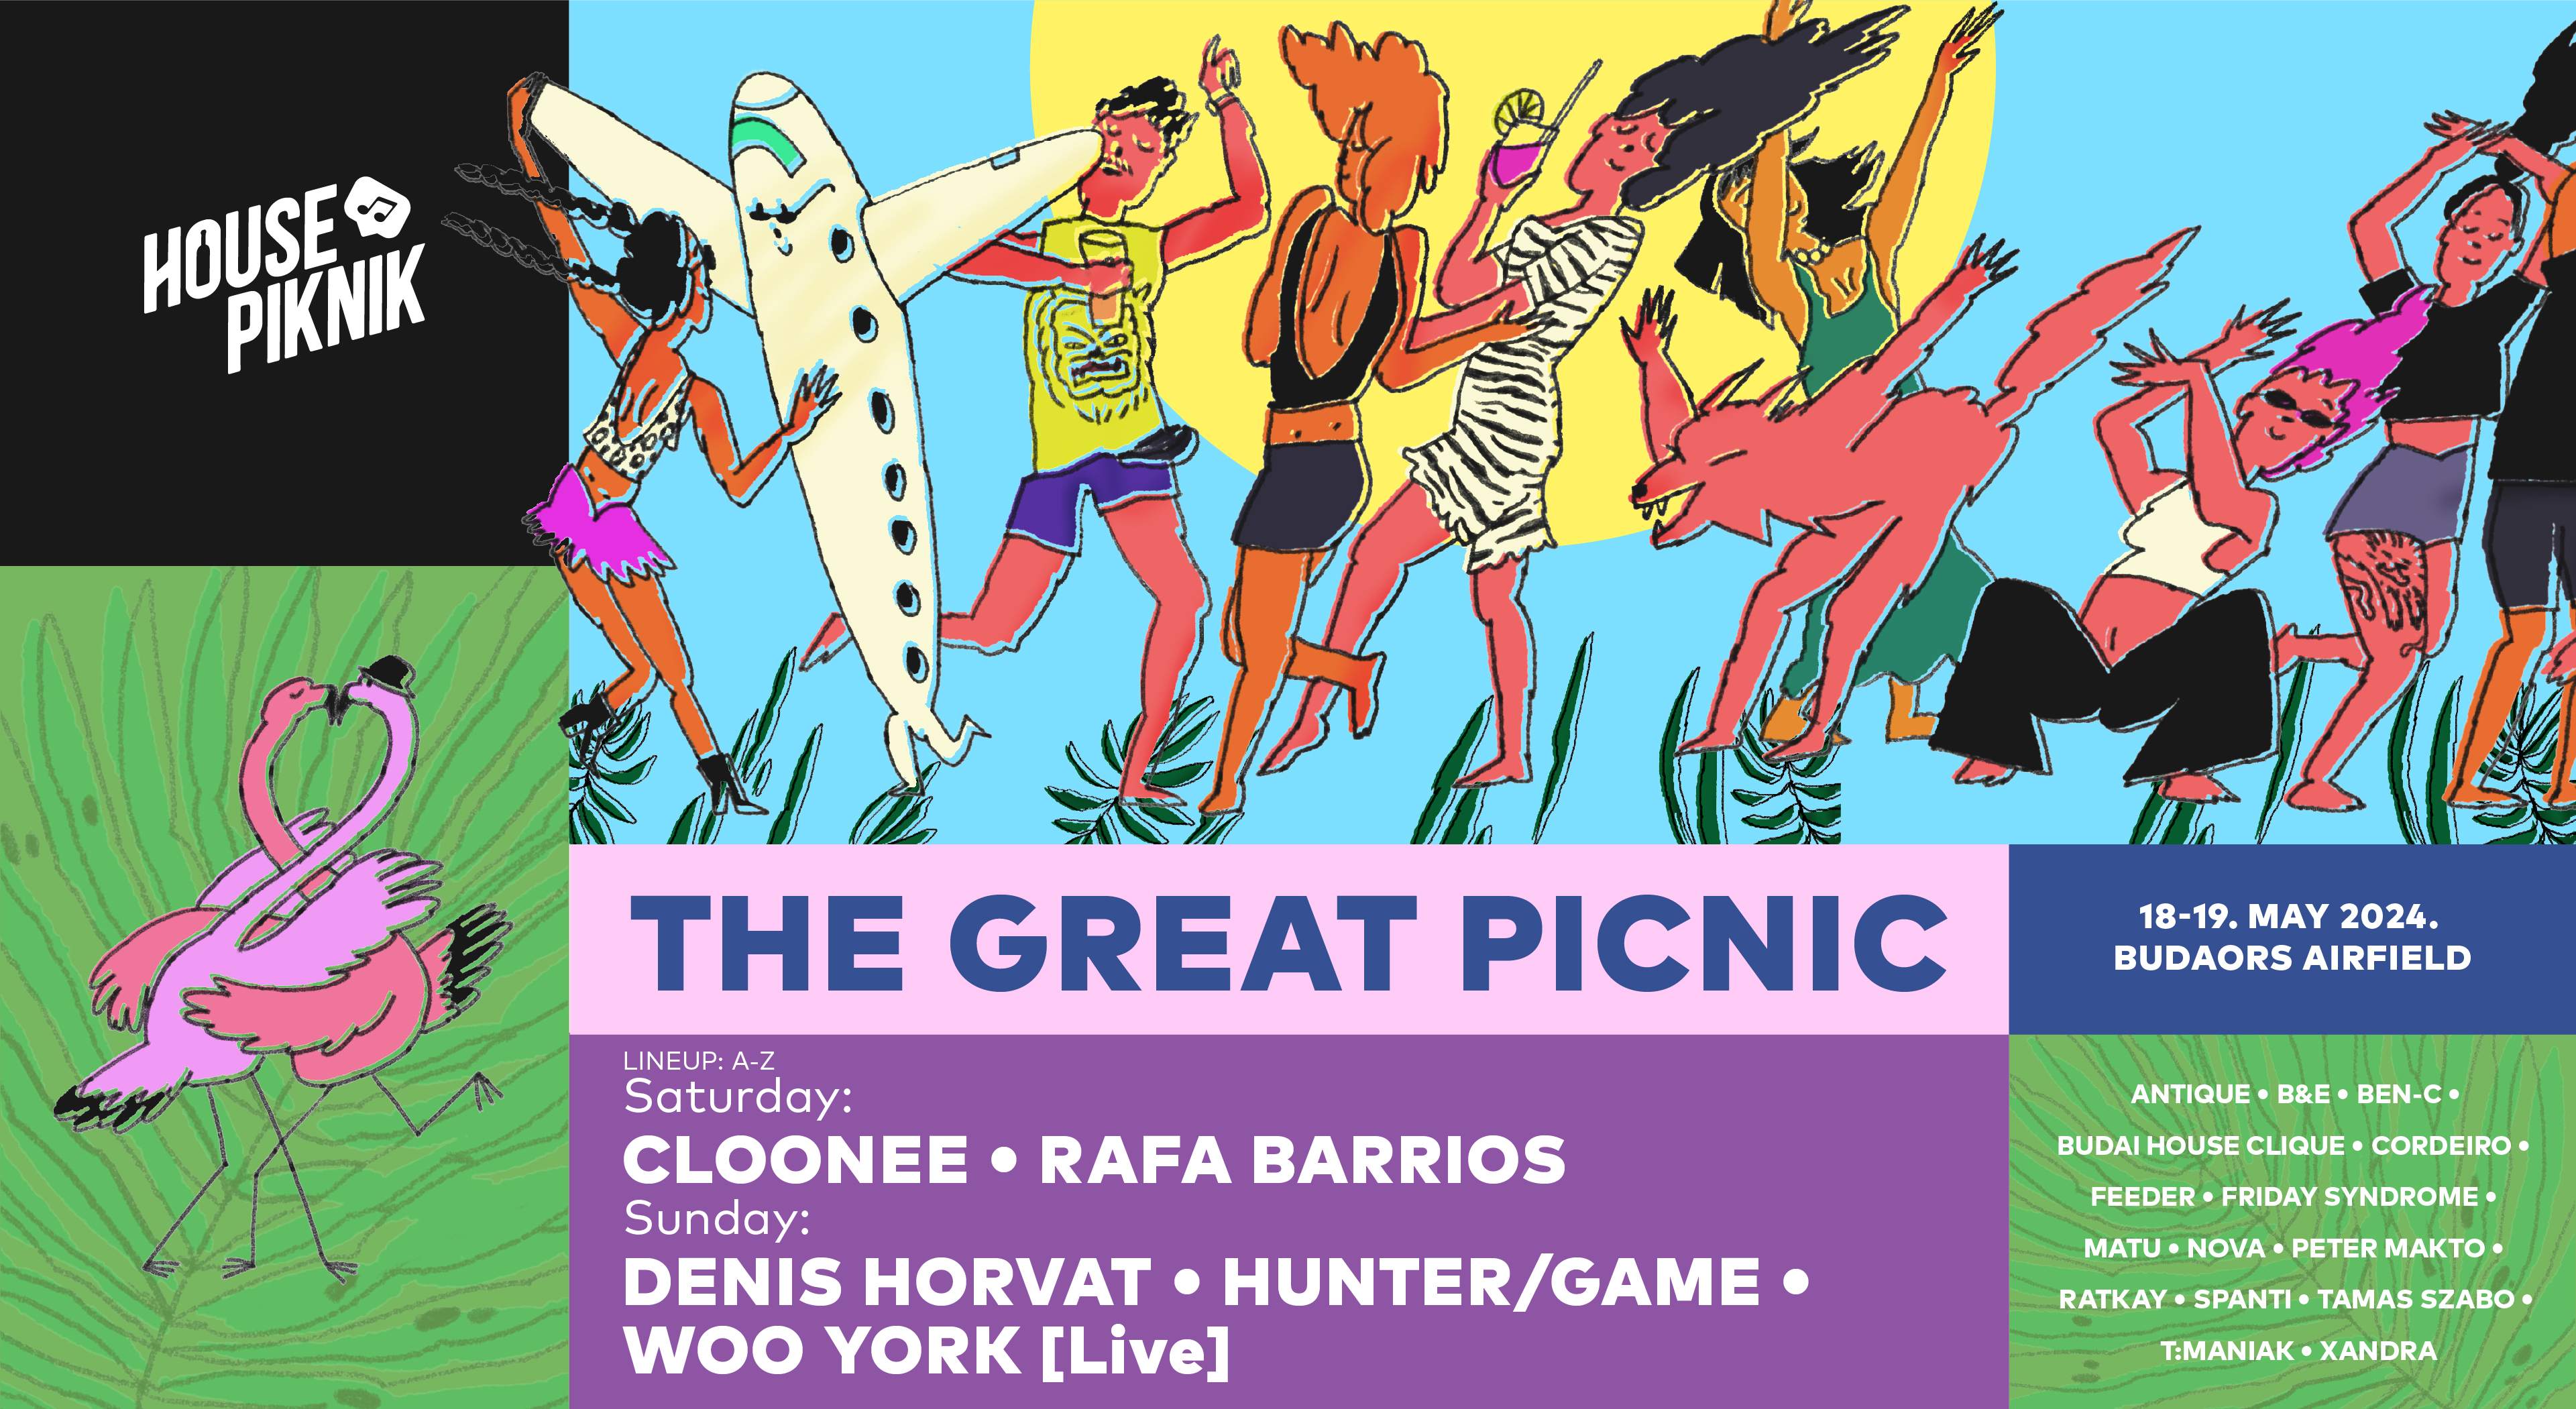 HOUSE PIKNIK - Great Picnic with CLOONEE Woo York 'live' Hunter/Game Rafa Barrios Denis Horvat - フライヤー表